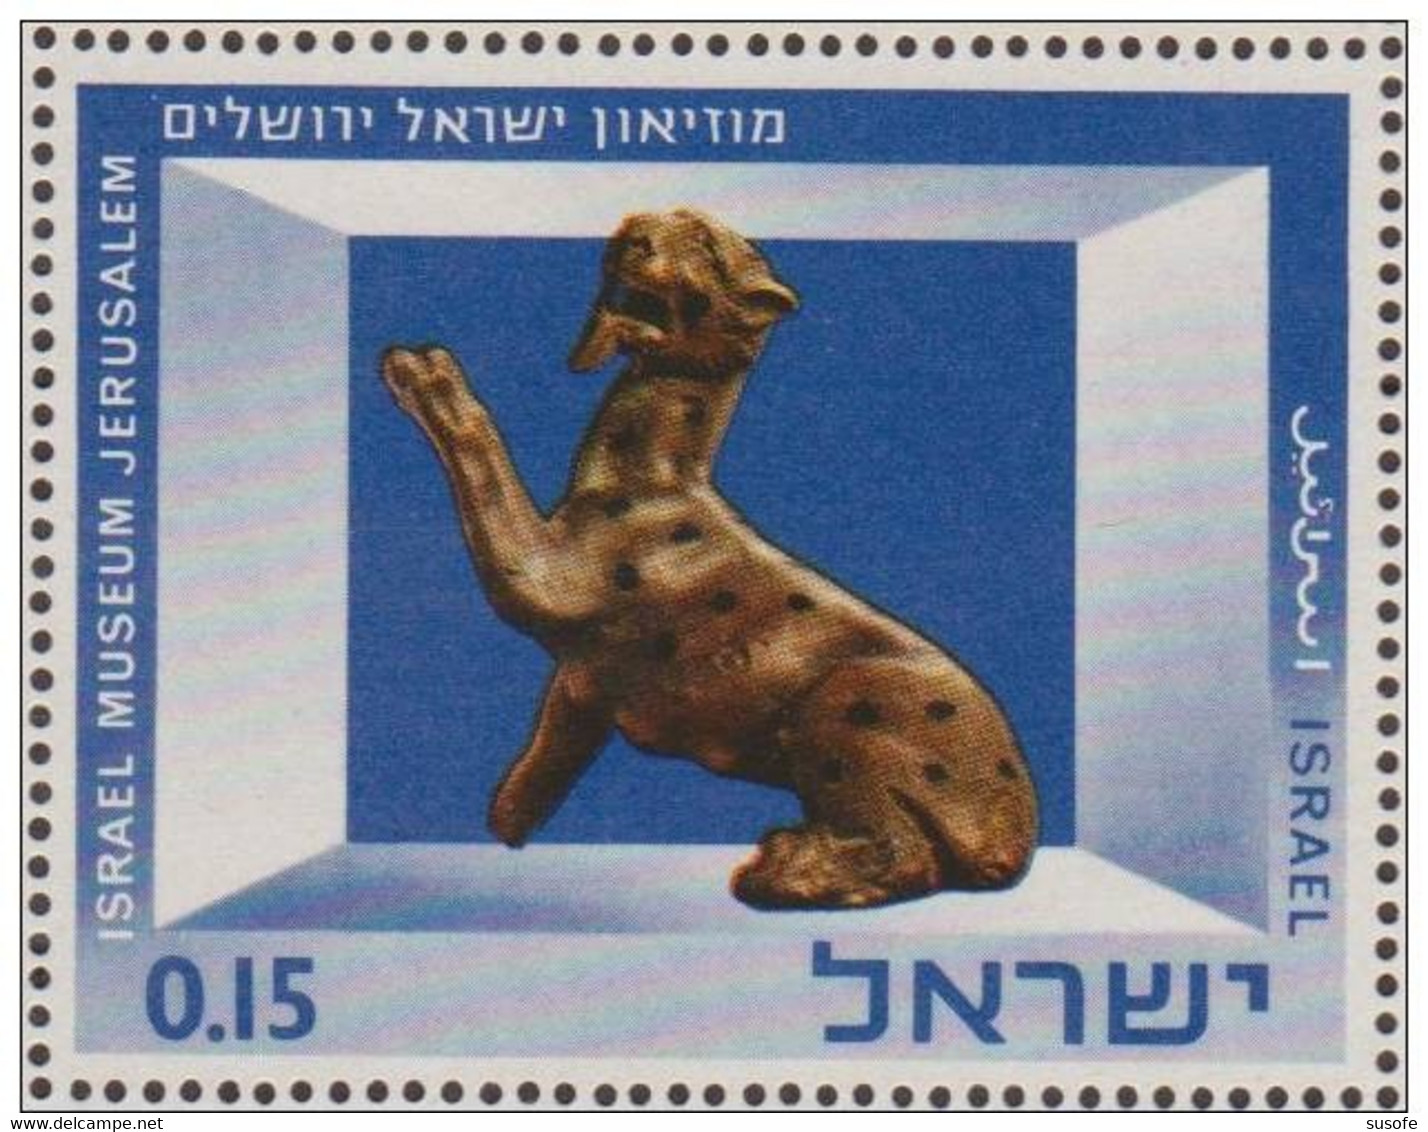 Israel 1966 Scott 323 Sello ** Pantera De Bronce Avdat Siglo I A.C. Museo De Israel Michel 371 Yvert 319 Stamps Timbre - Unused Stamps (without Tabs)